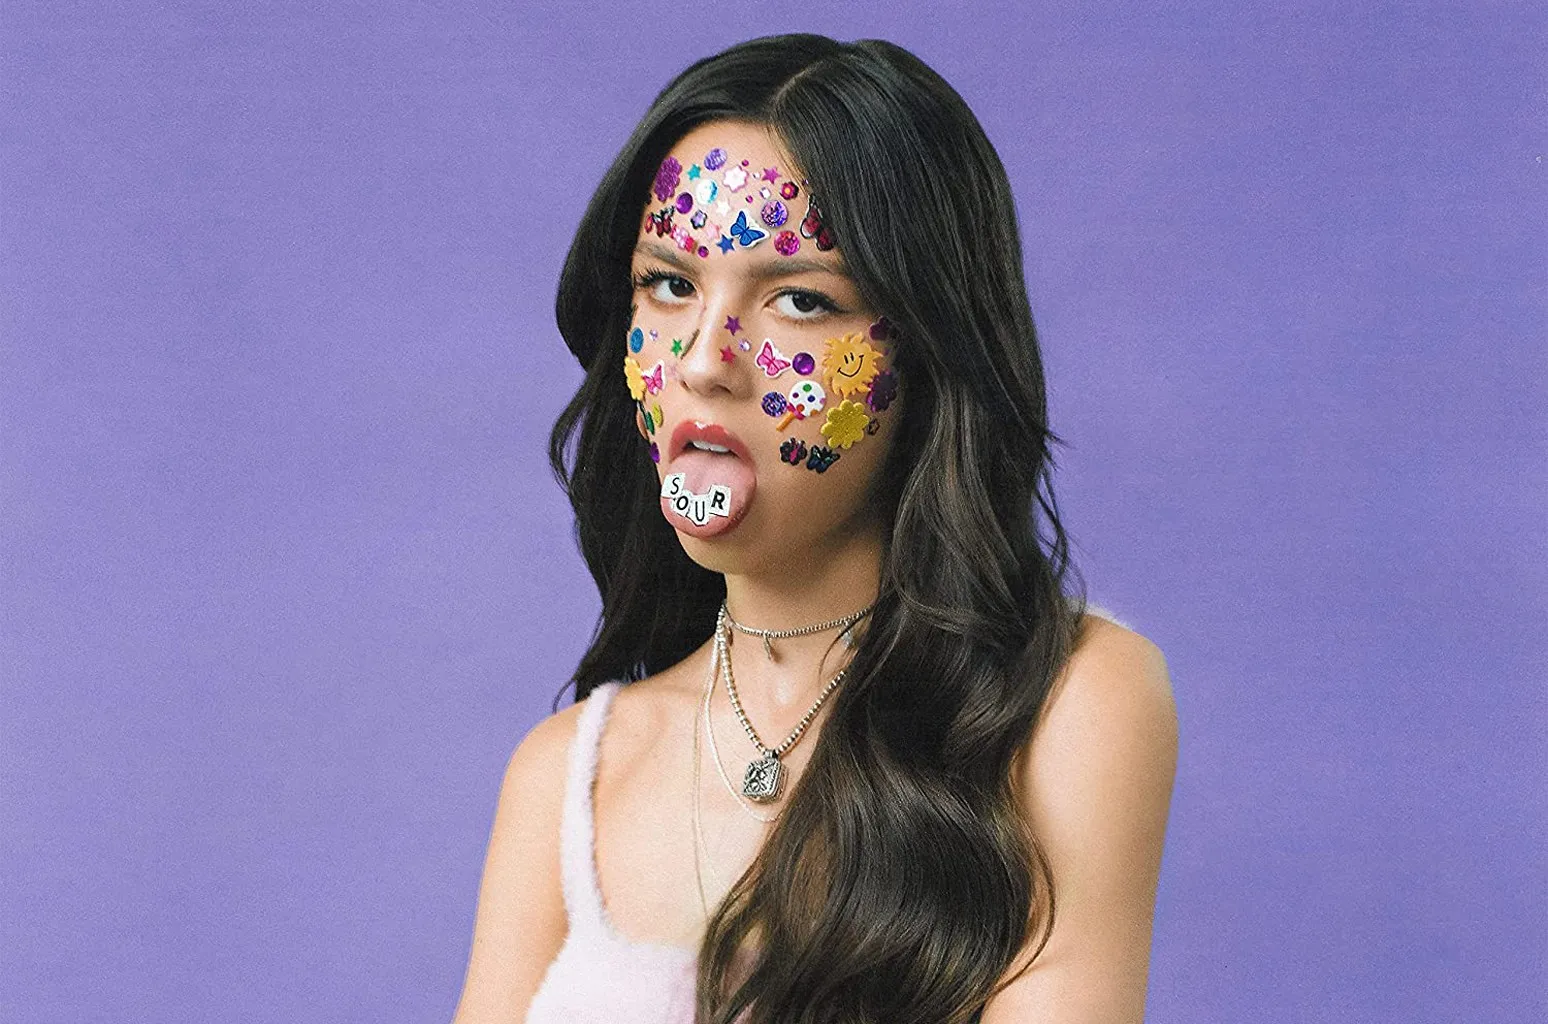 Olivia Rodrigo album cover for "Sour," which began her feud with Carpenter. She stands with her tongue out and she arms crossed.